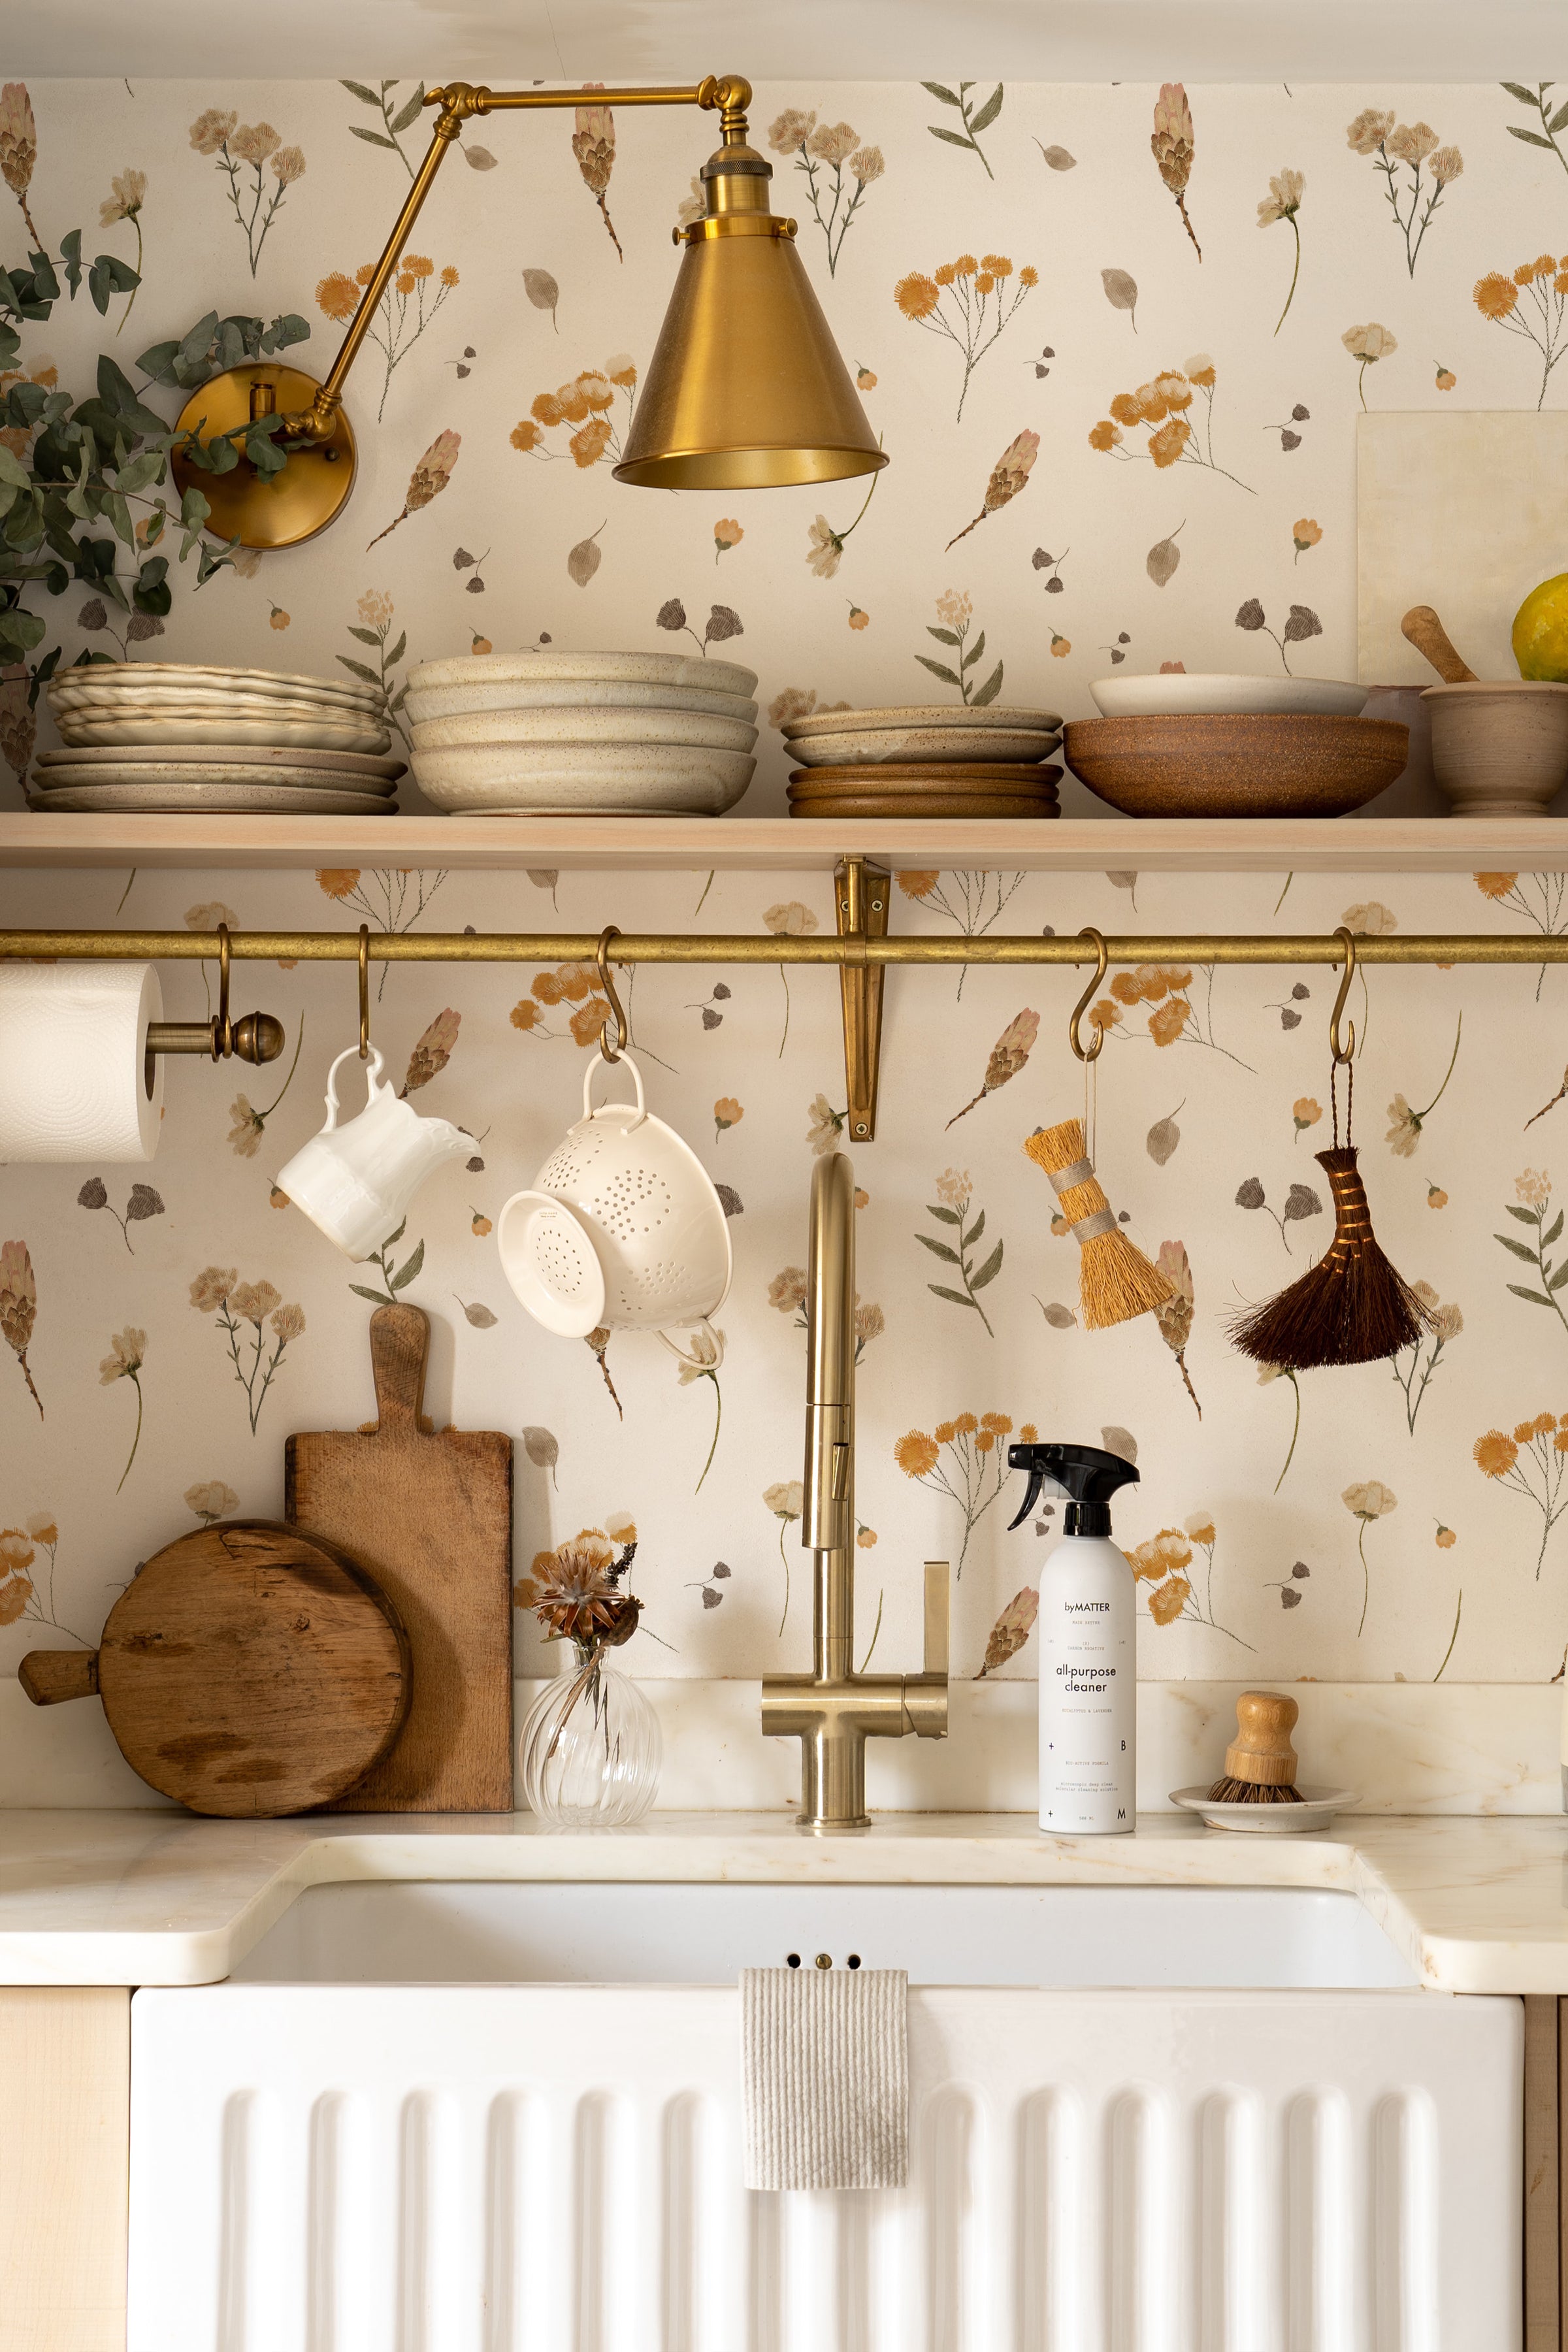 A charming kitchen corner with open shelving displaying ceramics and wooden utensils. The Buttercup Fields Wallpaper lines the wall behind a farmhouse sink, providing a cheerful and rustic backdrop with its yellow and gray botanical print.